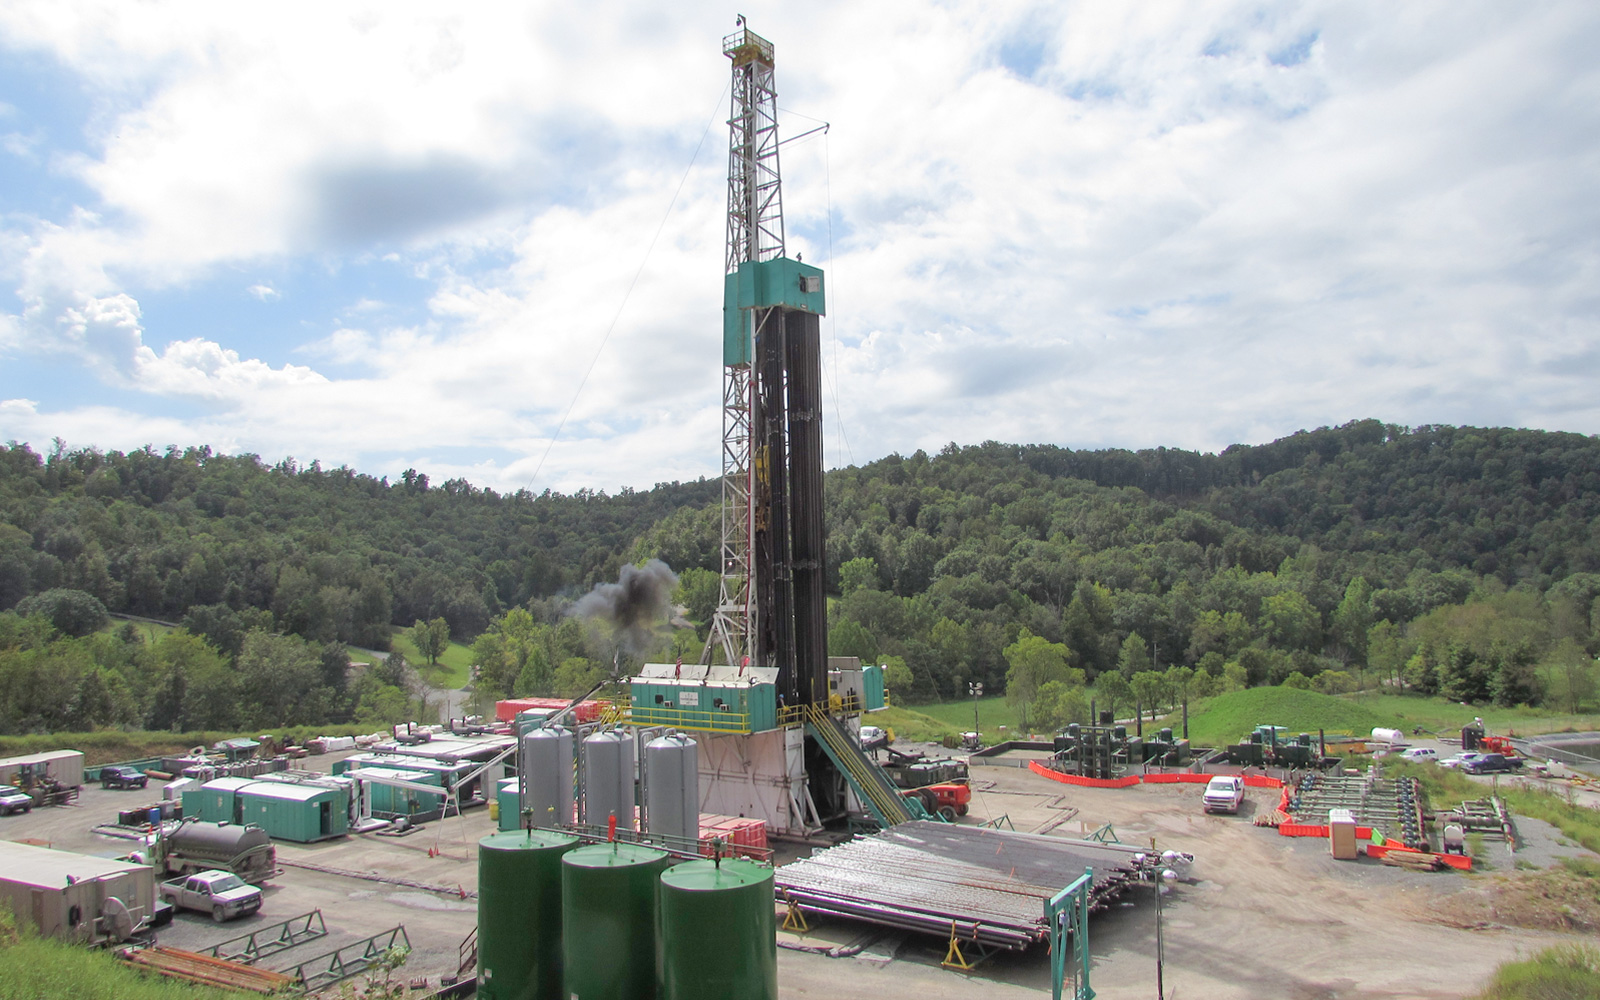 A drilling rig set up in a cleared dirt lot with trucks and trailers around, and trees in the background